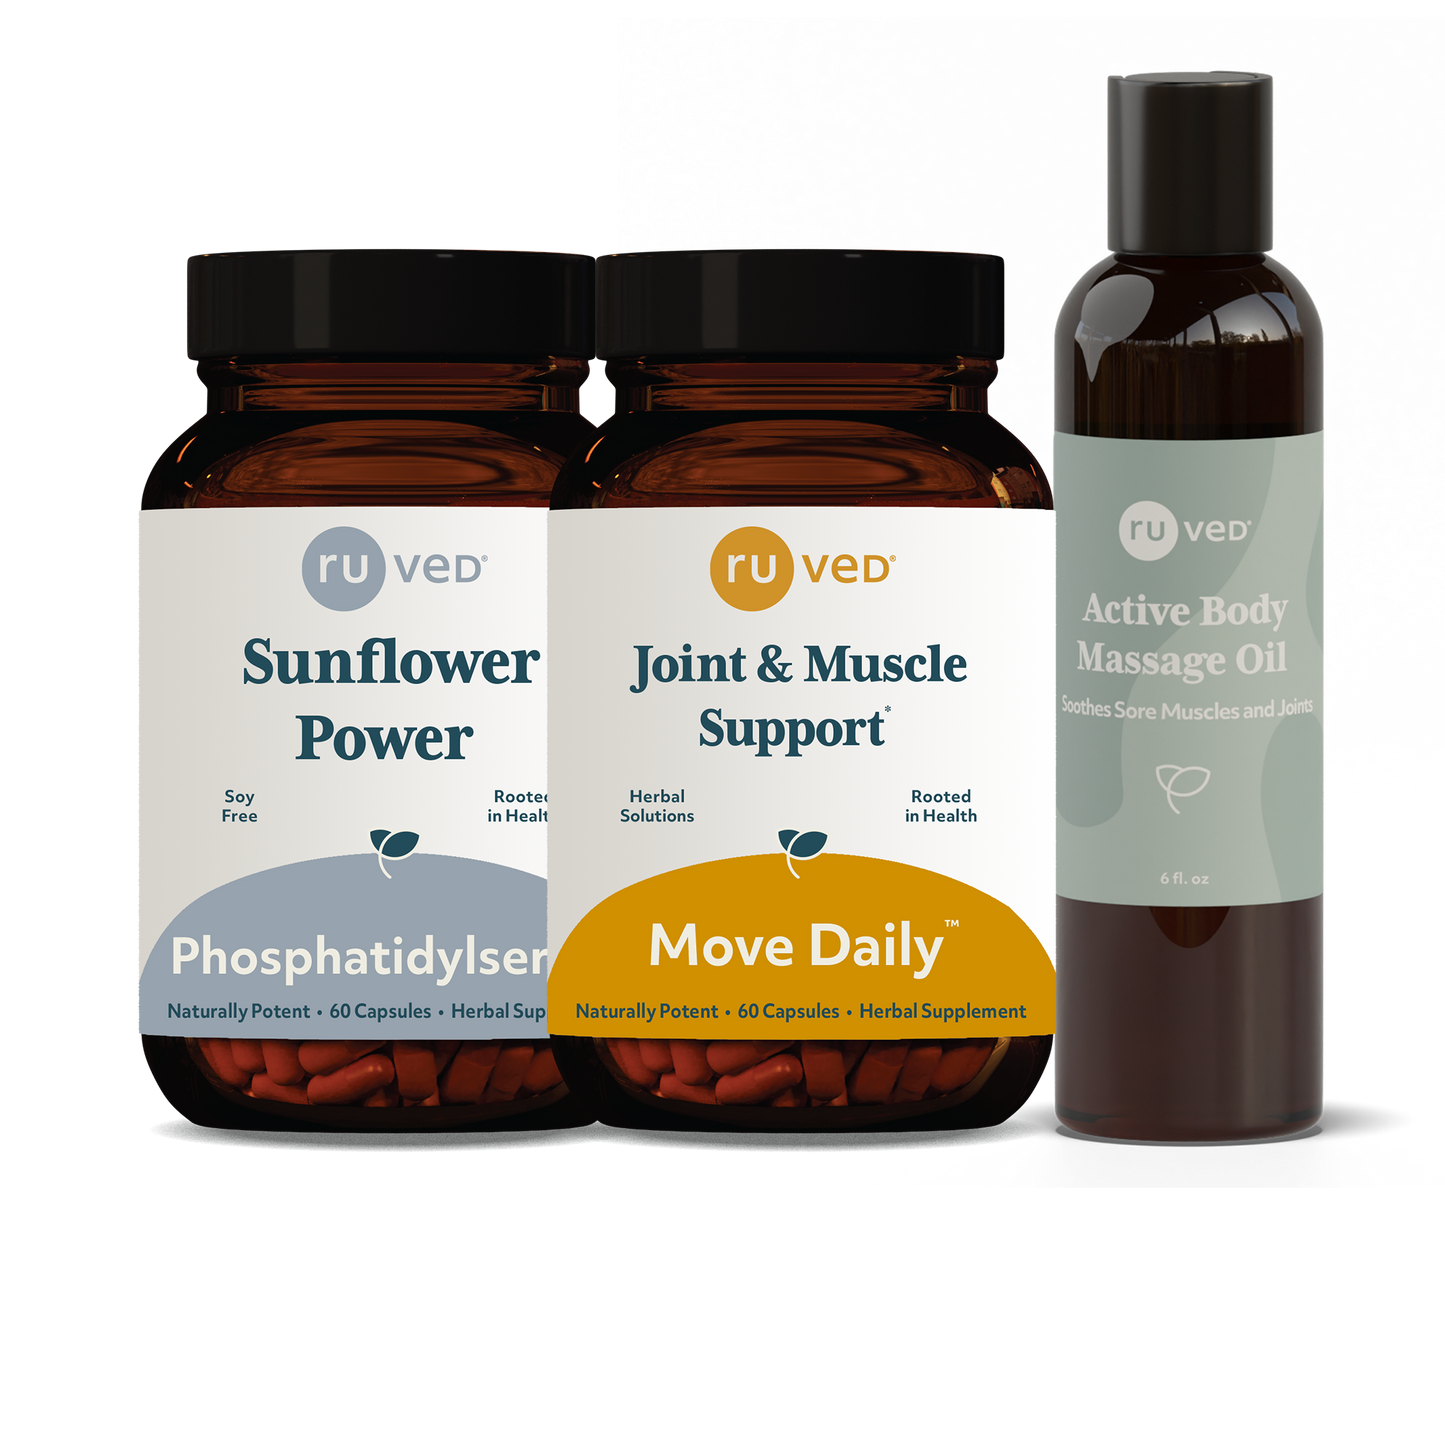 Phosphatidylserine Move Daily Active Body Massage Oil bundle Bottles front by ruved herbal supplements